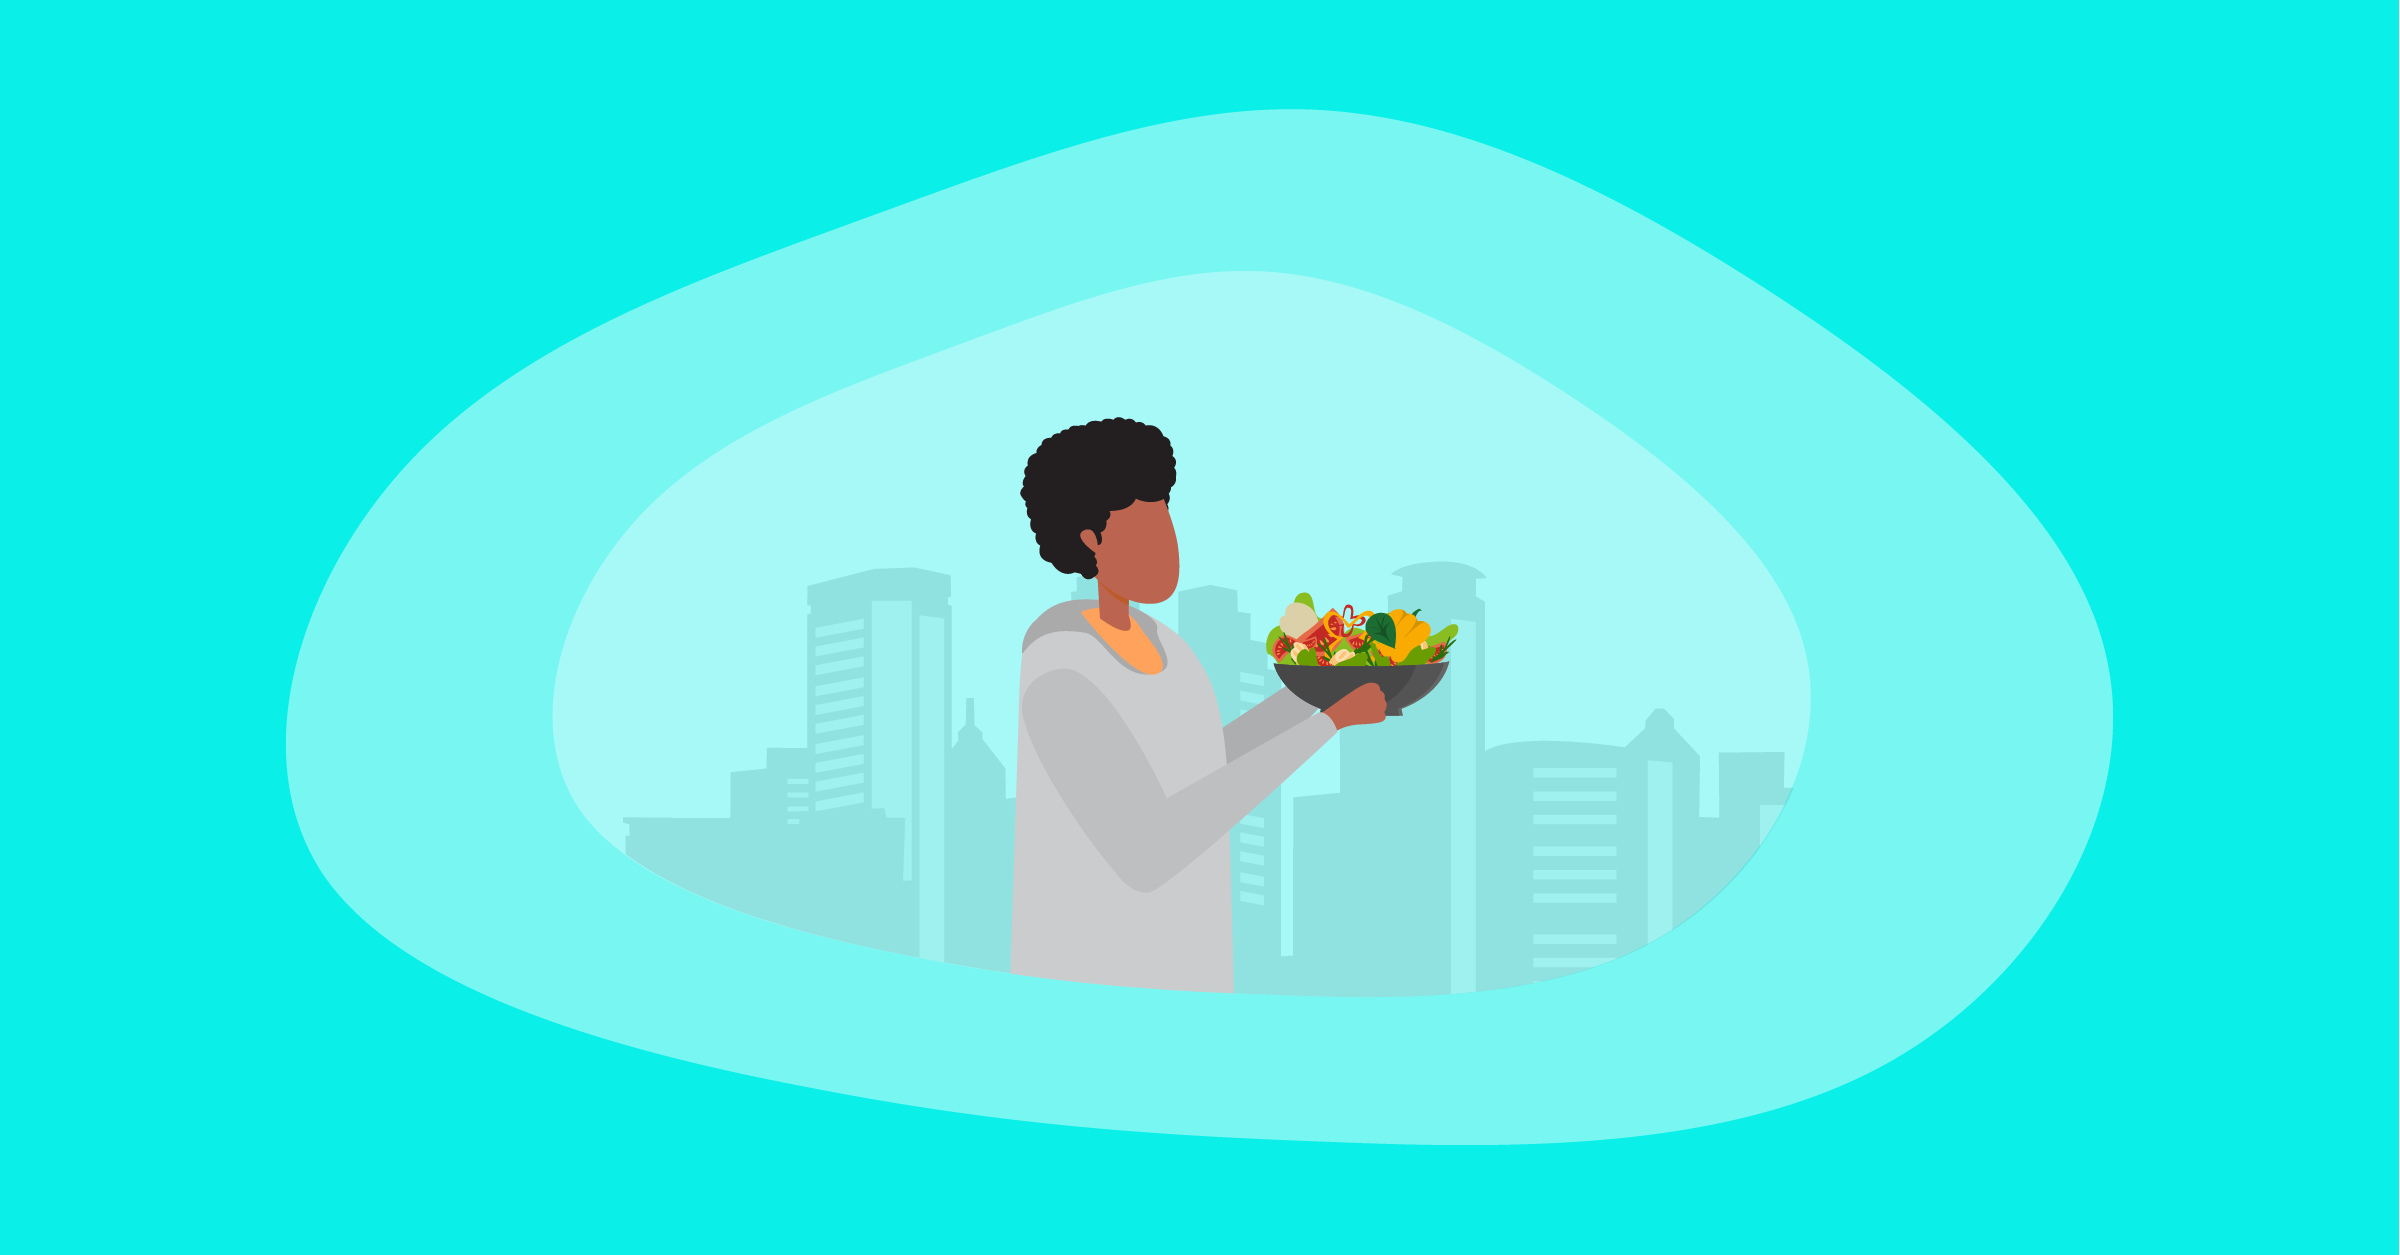 Illustration of a person holding a bowl of vegetables